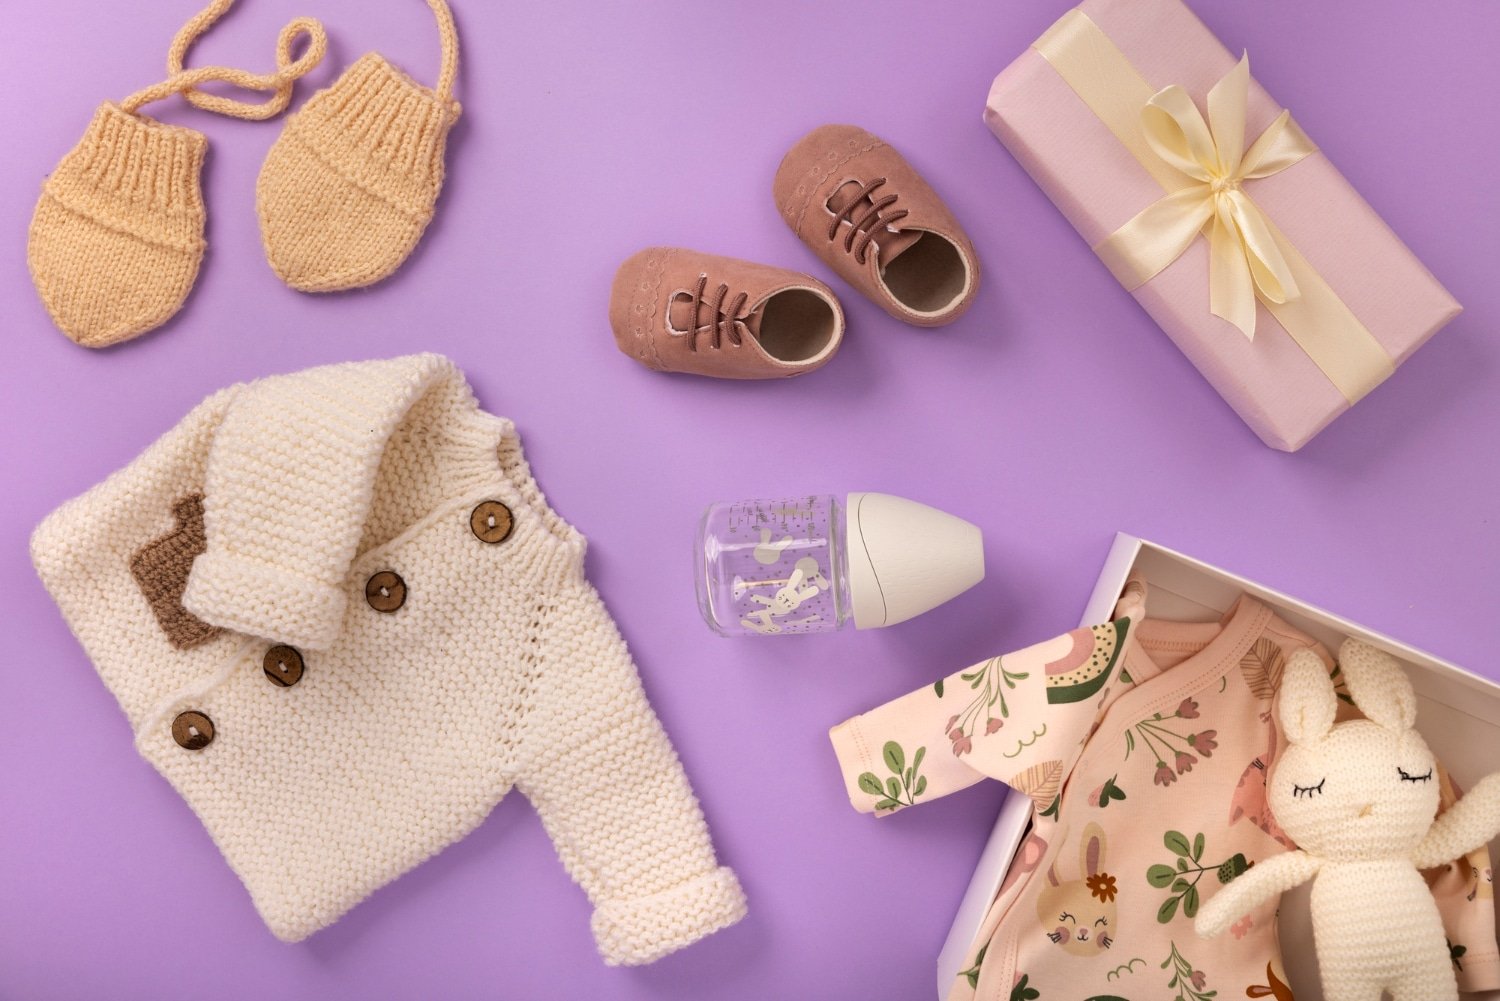 You are currently viewing Gerber Childrenswear: Adorable Essentials for Your Little Ones